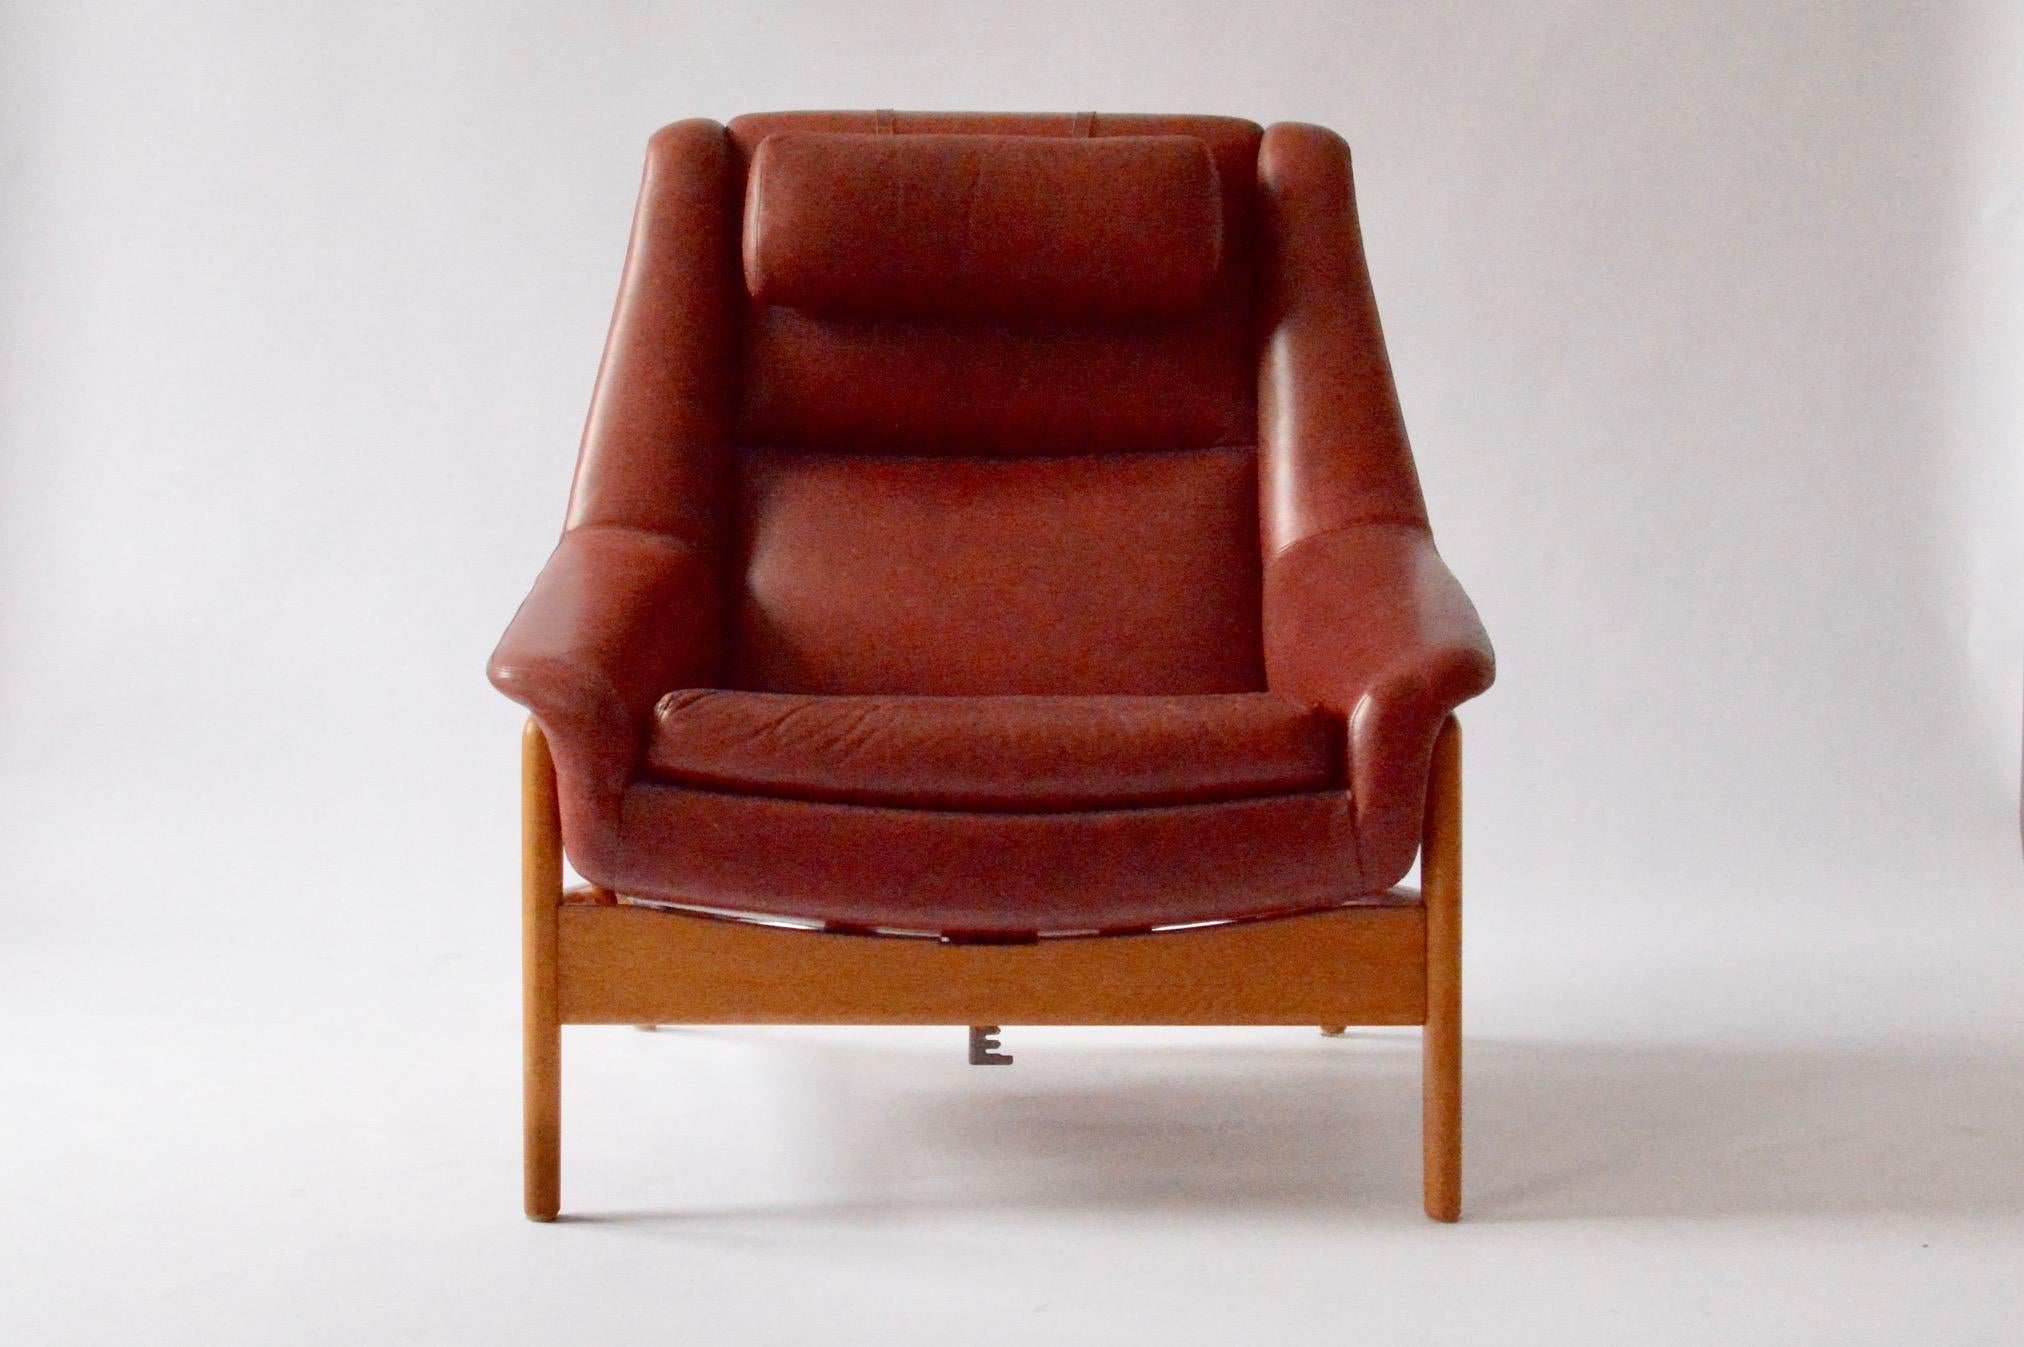 The 'Profil' easy chair by Folke Ohlsson  is made of fine red-melange leather and a frame of massive oak. It is manufactured by DUX, Sweden in the 1960s.

The design of the chair is extremely elegant and well proportioned although it is a very